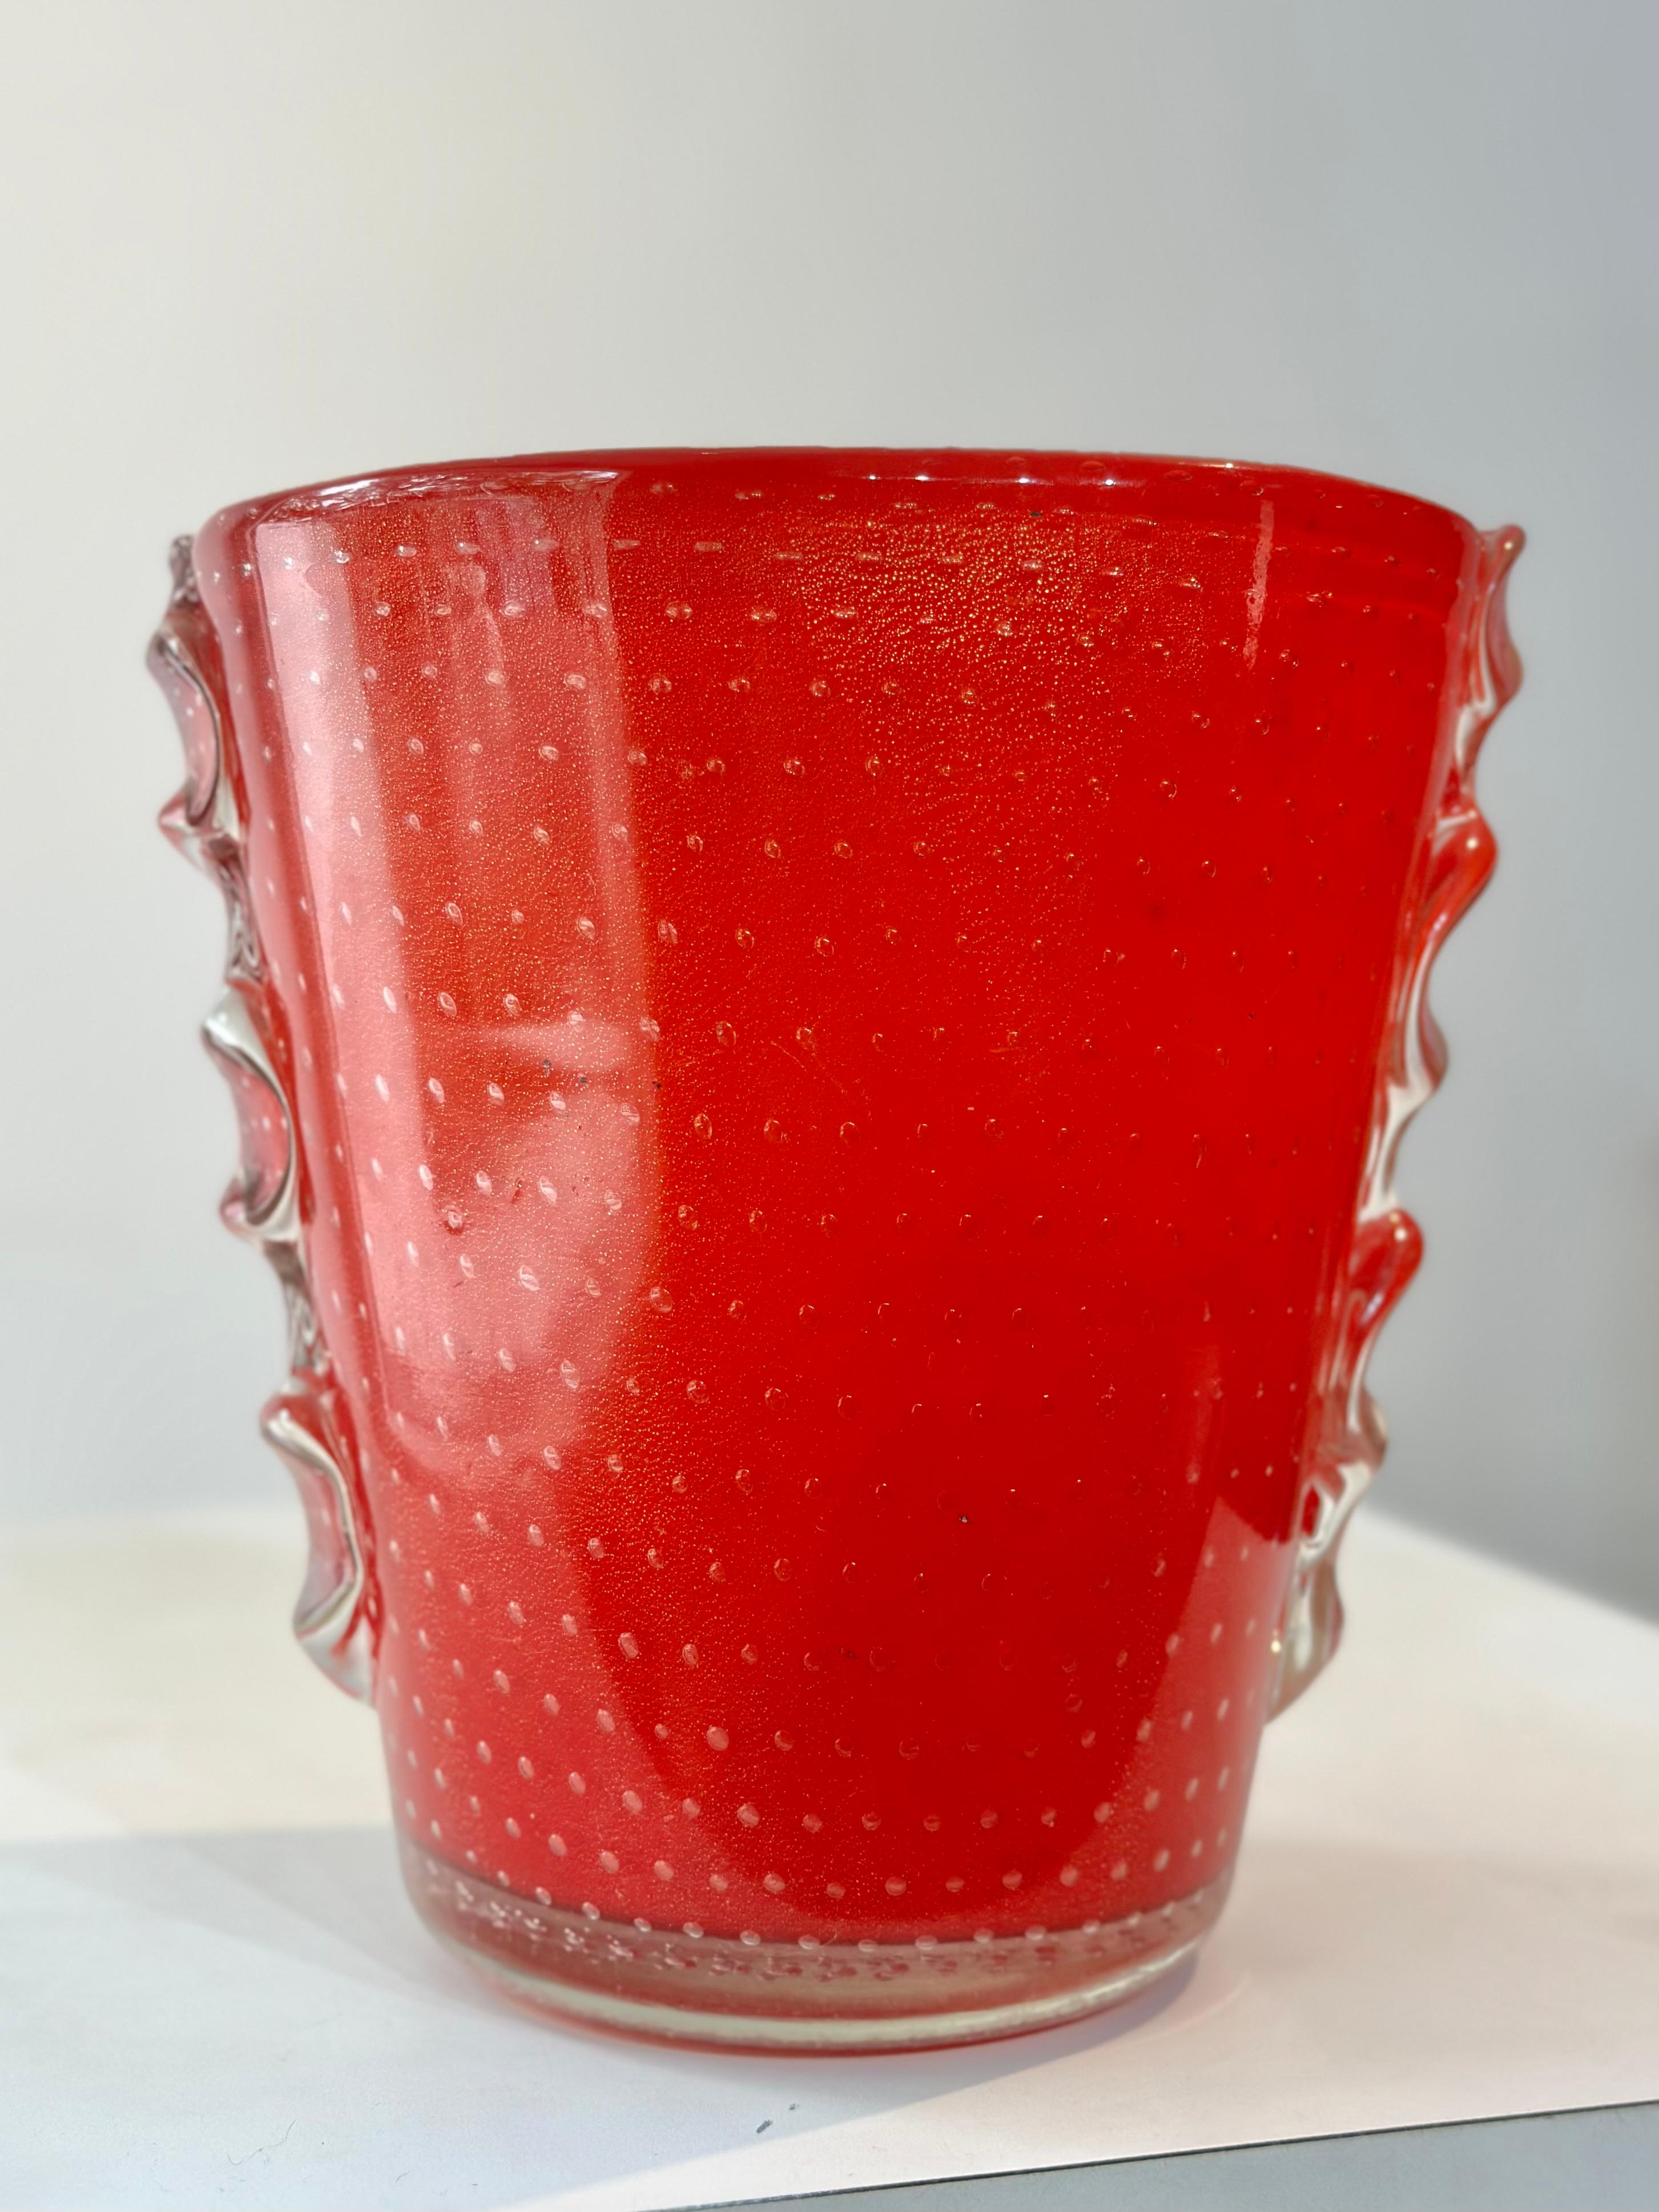 Murano vase in a magnificent red color characterized by symmetric bubbles, in an excellent conservation state. This is a very desired item for both collection and decoration due to its radiant color and beautiful shape.